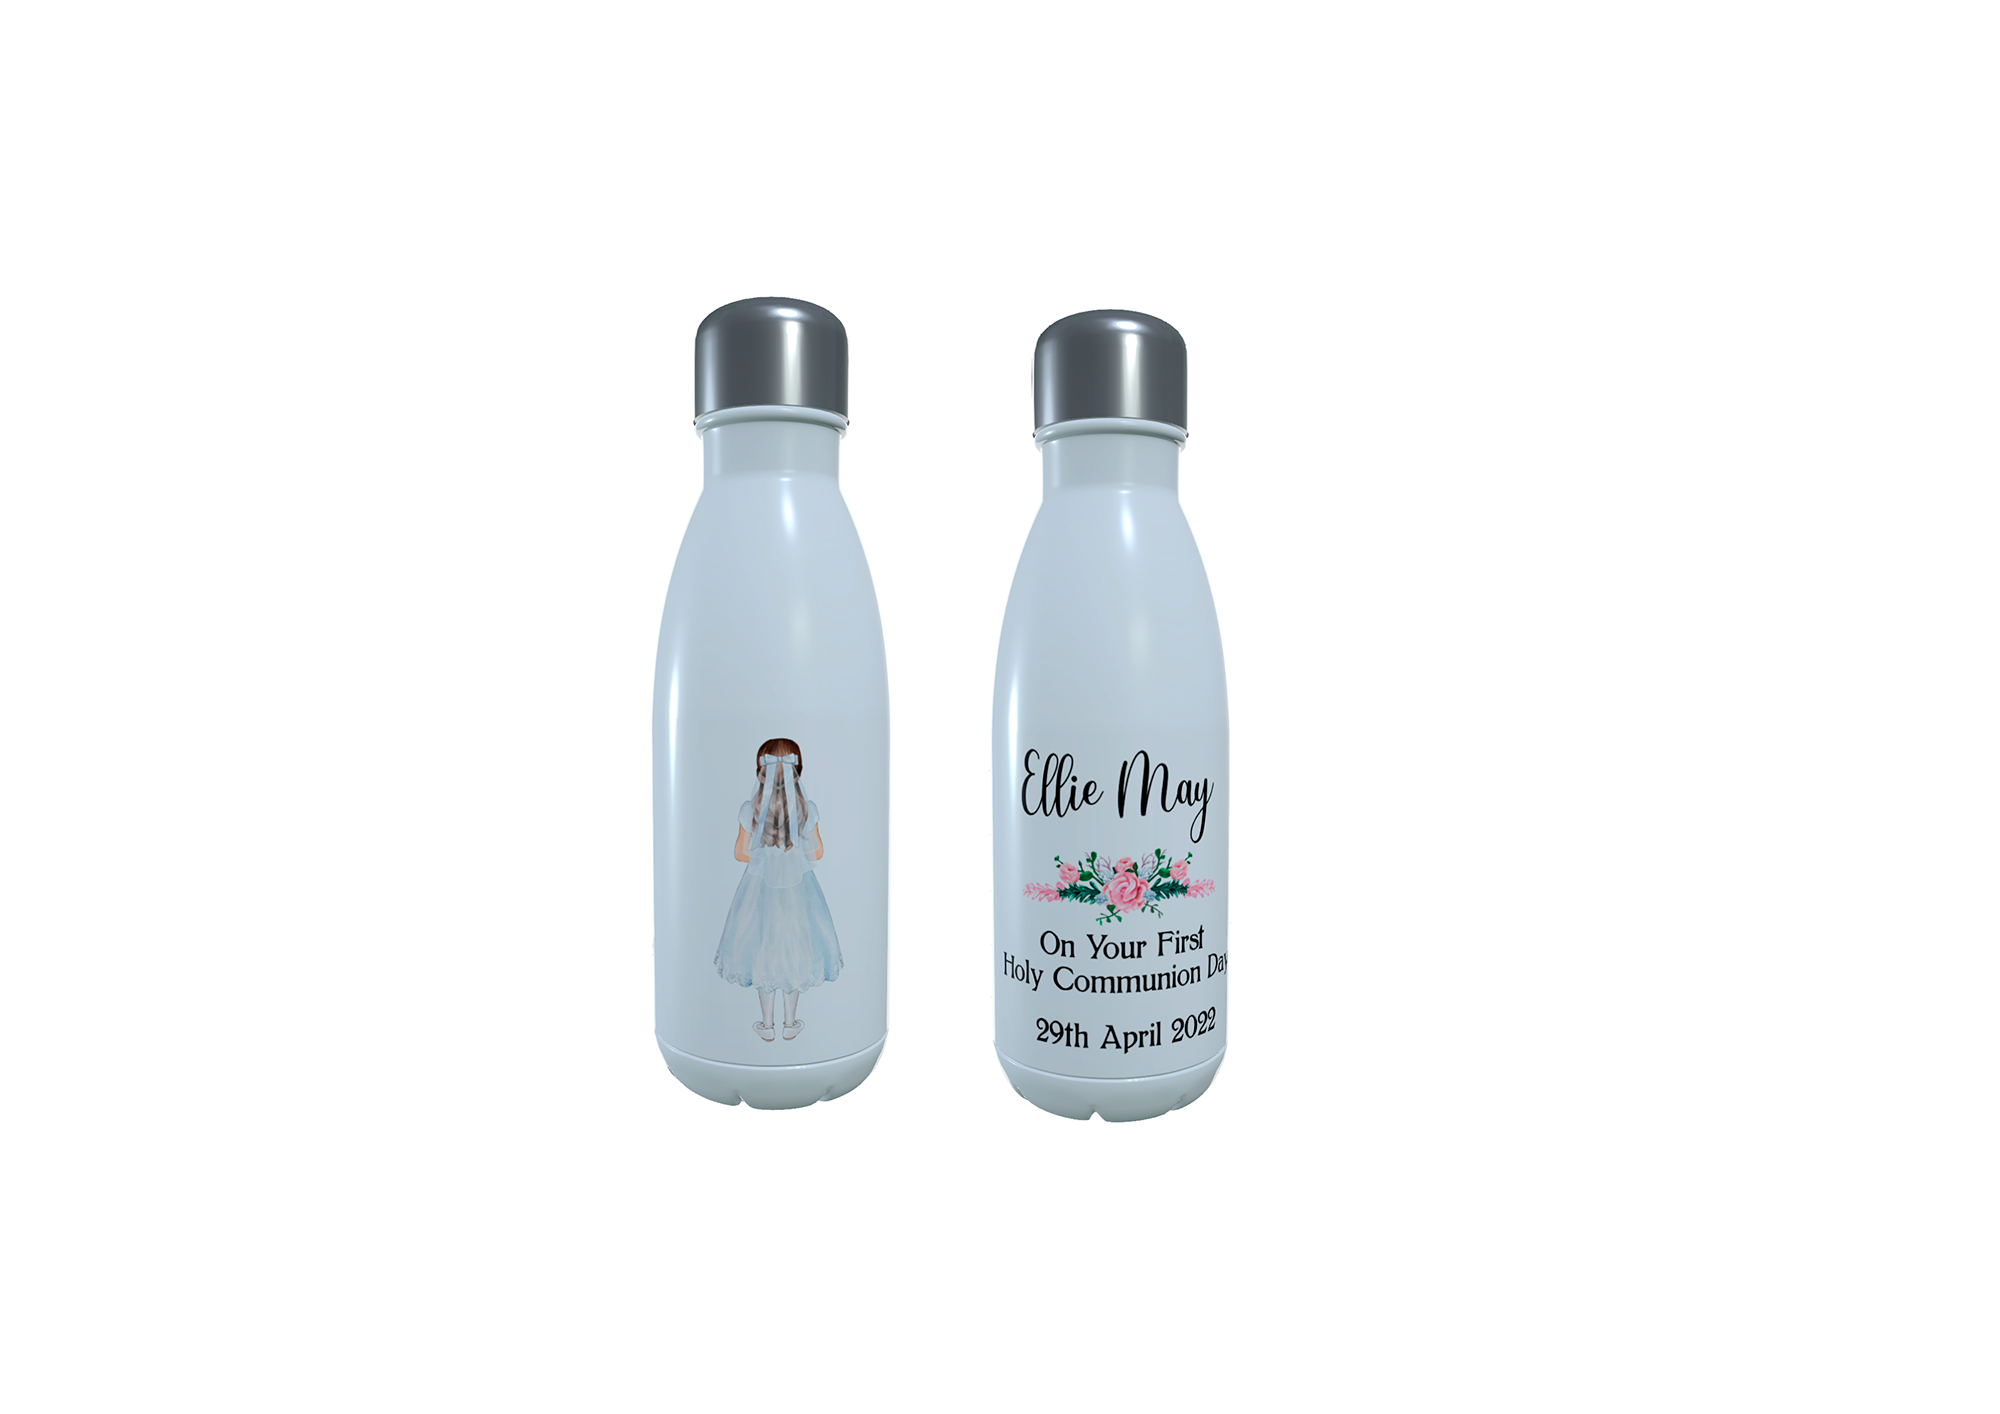 Holy Communion Personalised Water Bottle, Confirmation Day Gift